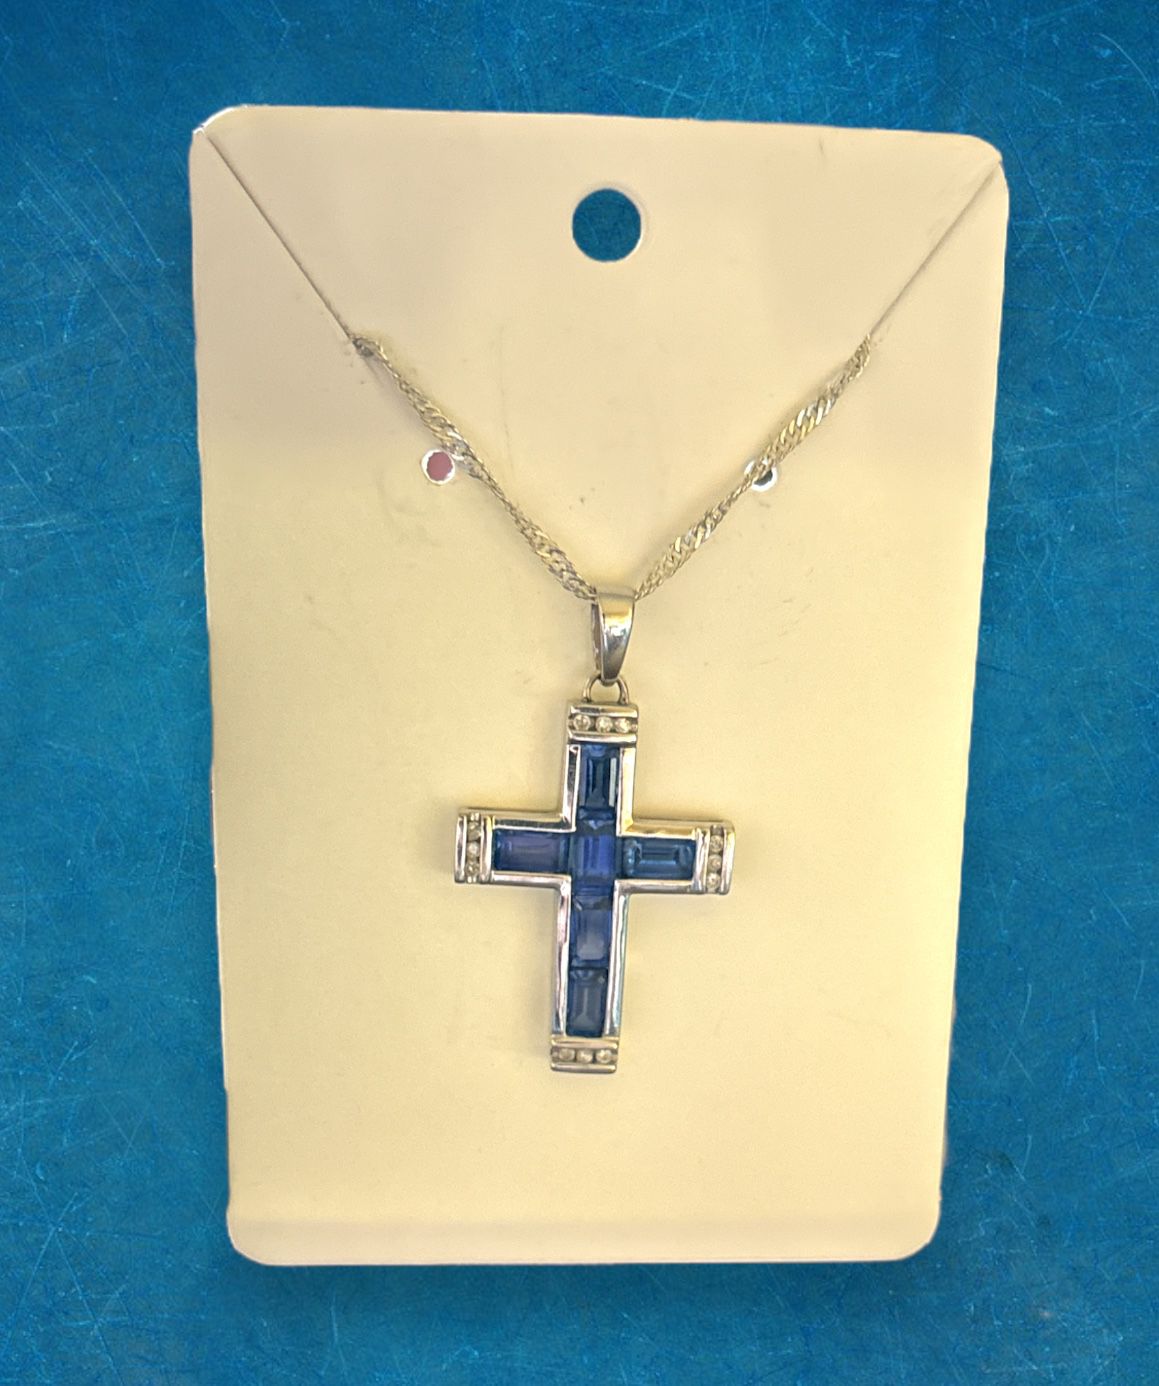 Sapphire & Silver Twisted Chain Cross Necklace 8” Length, 1.5" Pendant Blue